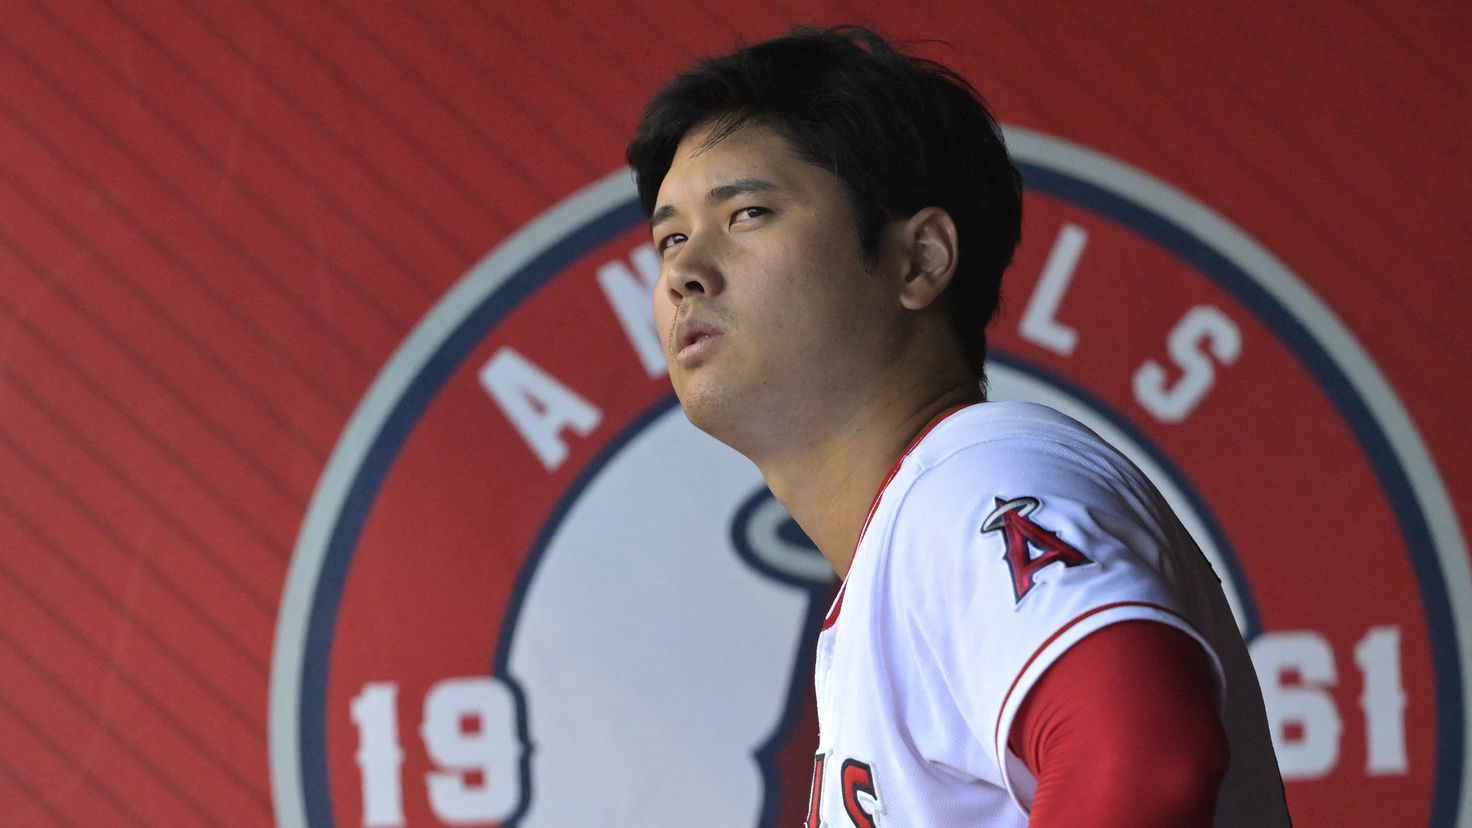 Shohei Ohtani heading to the Texas Rangers?  This is what is said